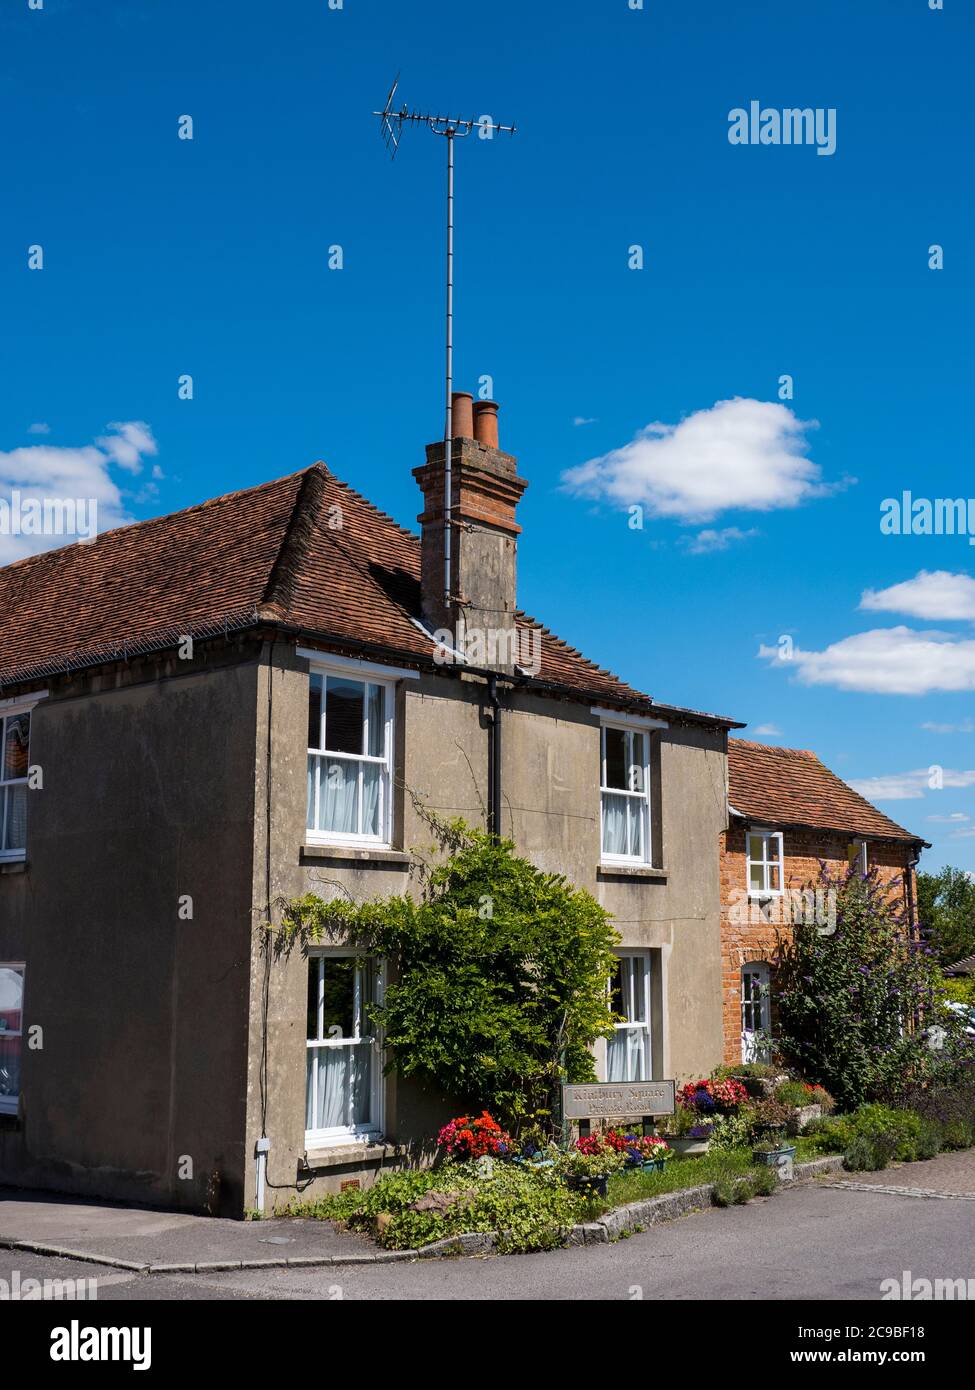 Village House with Flowers, Kintbury, Berkshire, Angleterre, Royaume-Uni, GB. Banque D'Images